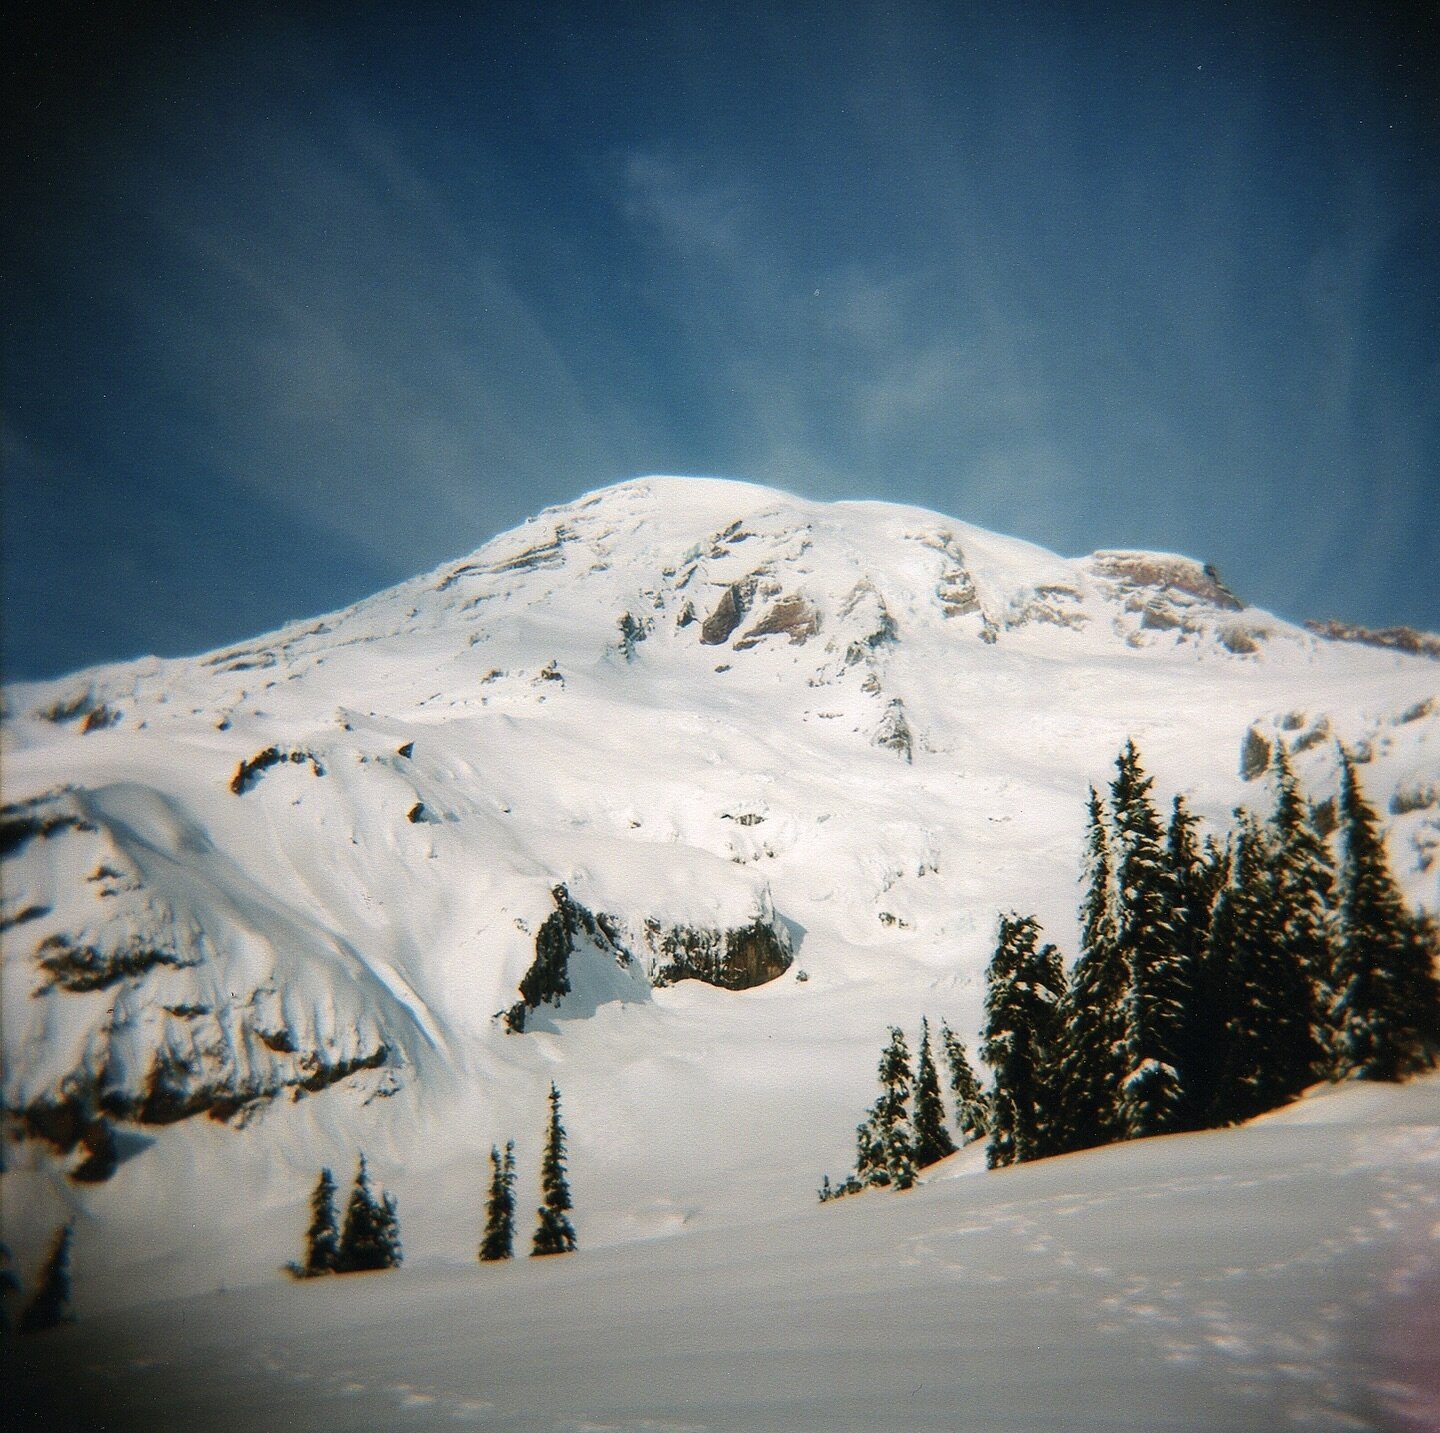 Is there anything better than Tahoma with a fresh coat of snow (on film)? 😍